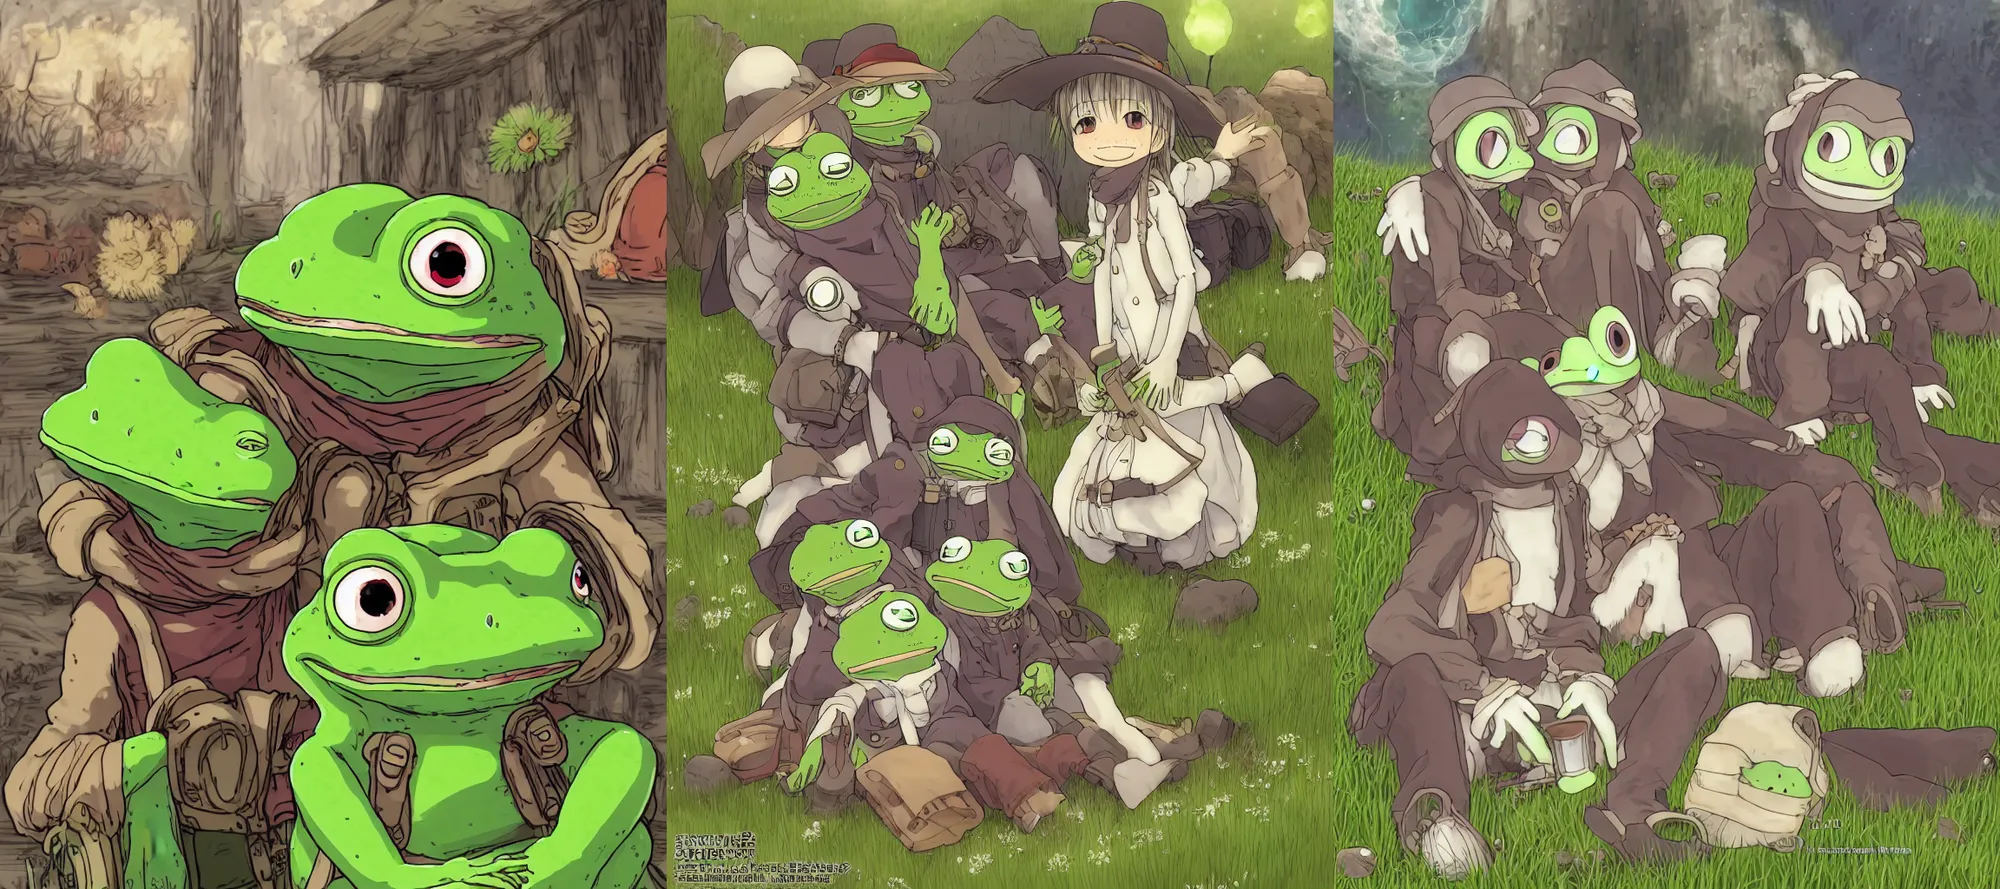 Prompt: resolution happiness of pepe love and life made in abyss read dead redemption 2 ivory dream like storybooks the agonies of transformation ,ascension into something greater the background primordial environment ancient mythical cavernous pepe the frog happy among family in a field sitting the value of love a clear prismatic sky, edge of nothingness love, warm ,Luminism, prismatic , fractals , pepe the frog , the feeling of loss art in the style of Akihito Tsukushi and and Arnold Lobel , claymation